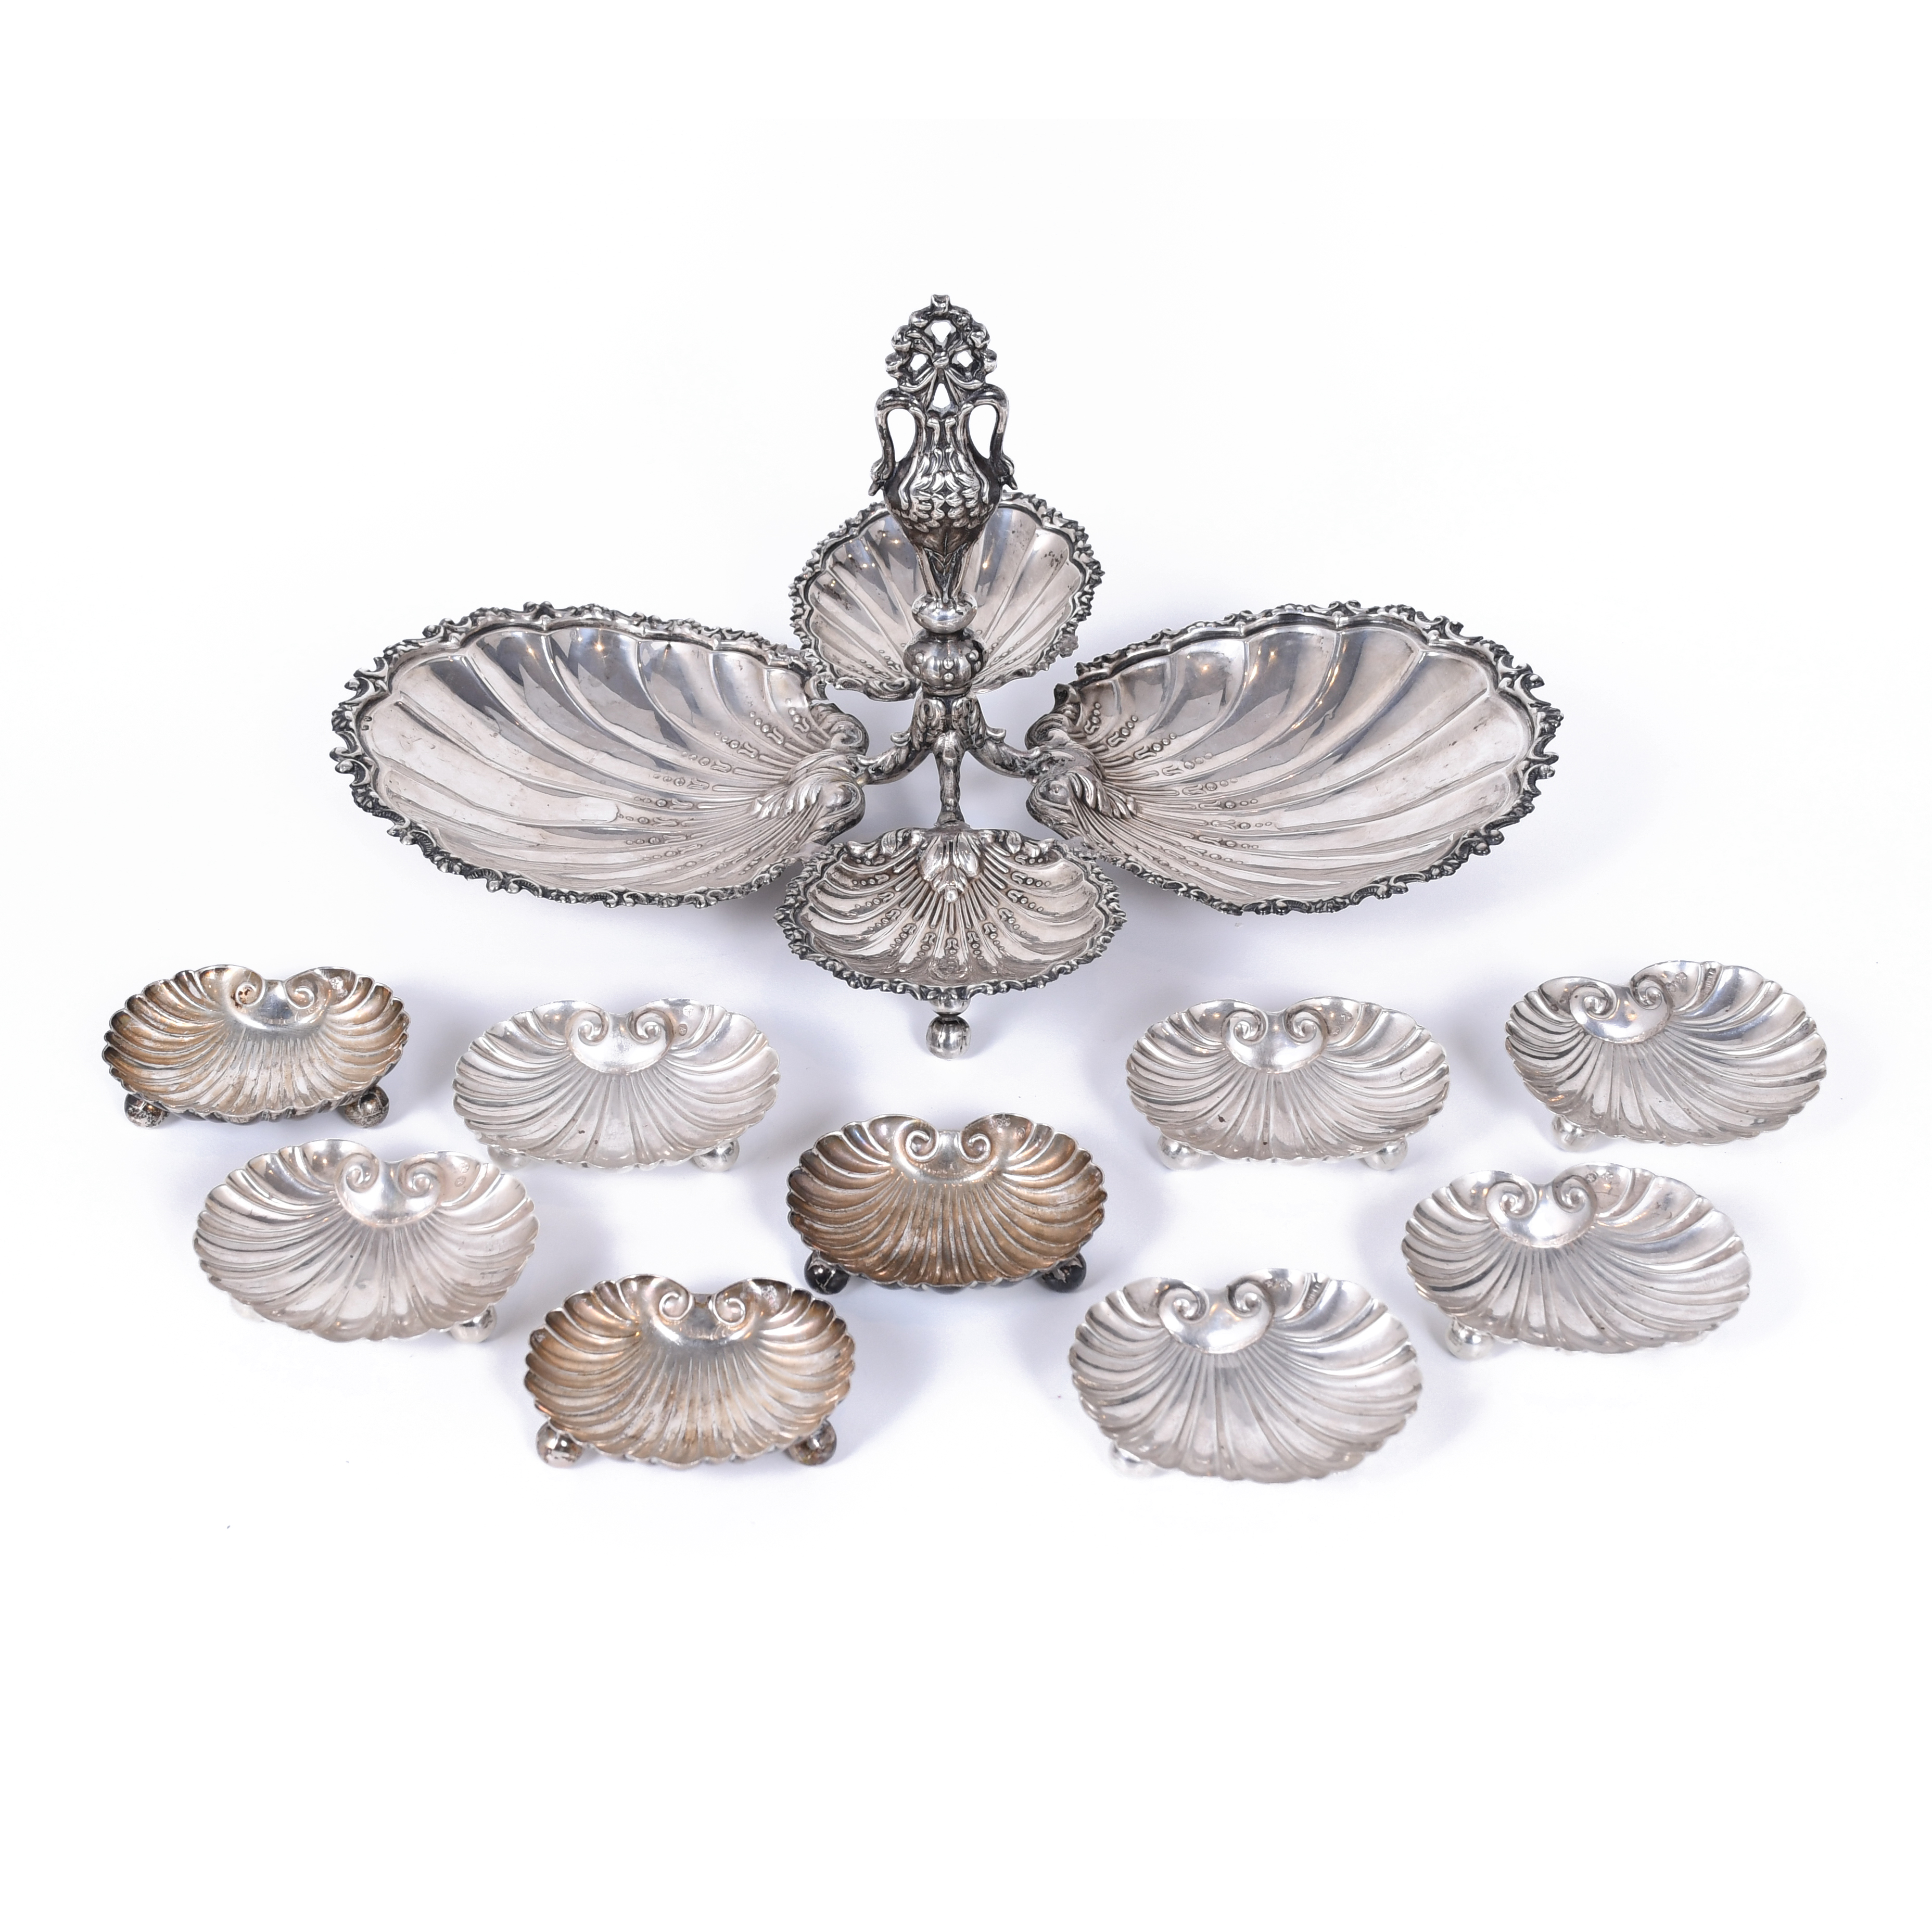 SILVER SET FOR SNAKCS, ROCALLA STYLE, 20TH CENTURY. 